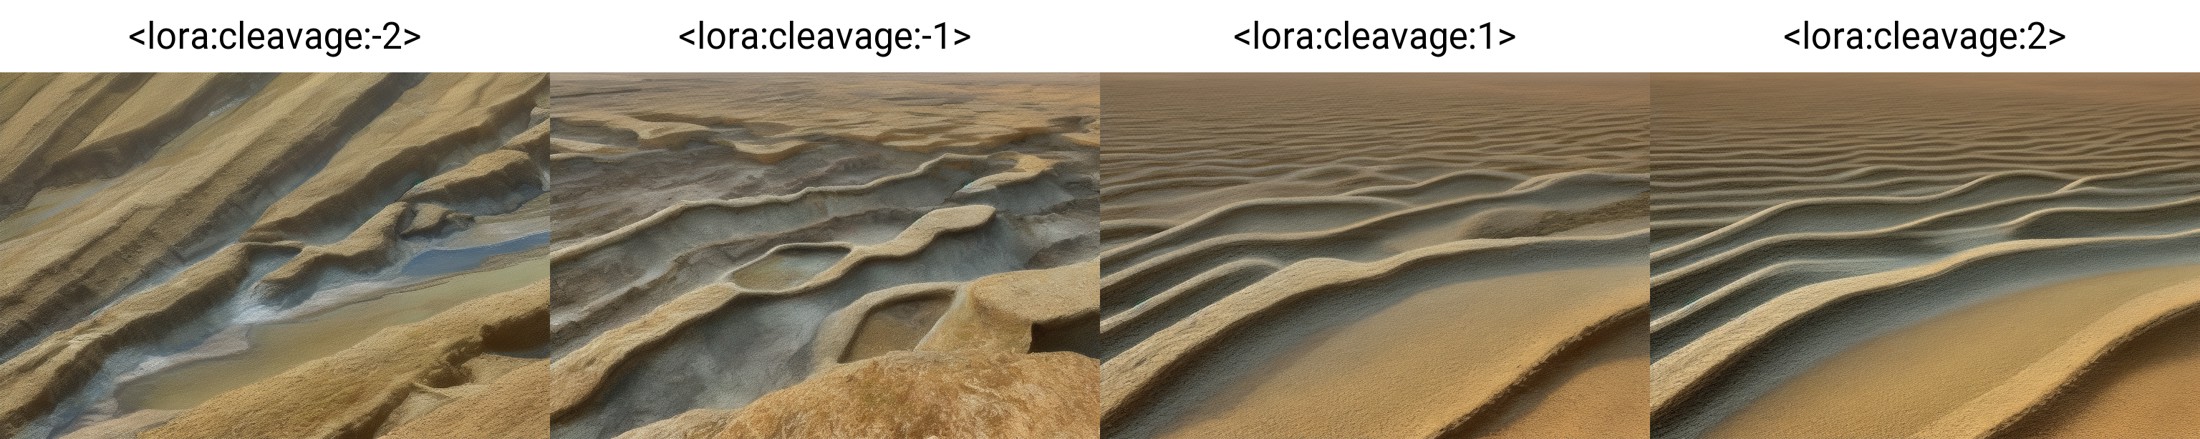 <lora:cleavage:-2>, cleavage, geology, petrology, (landscape:1.2), no_humans, sedimentary, diagenetic foliation